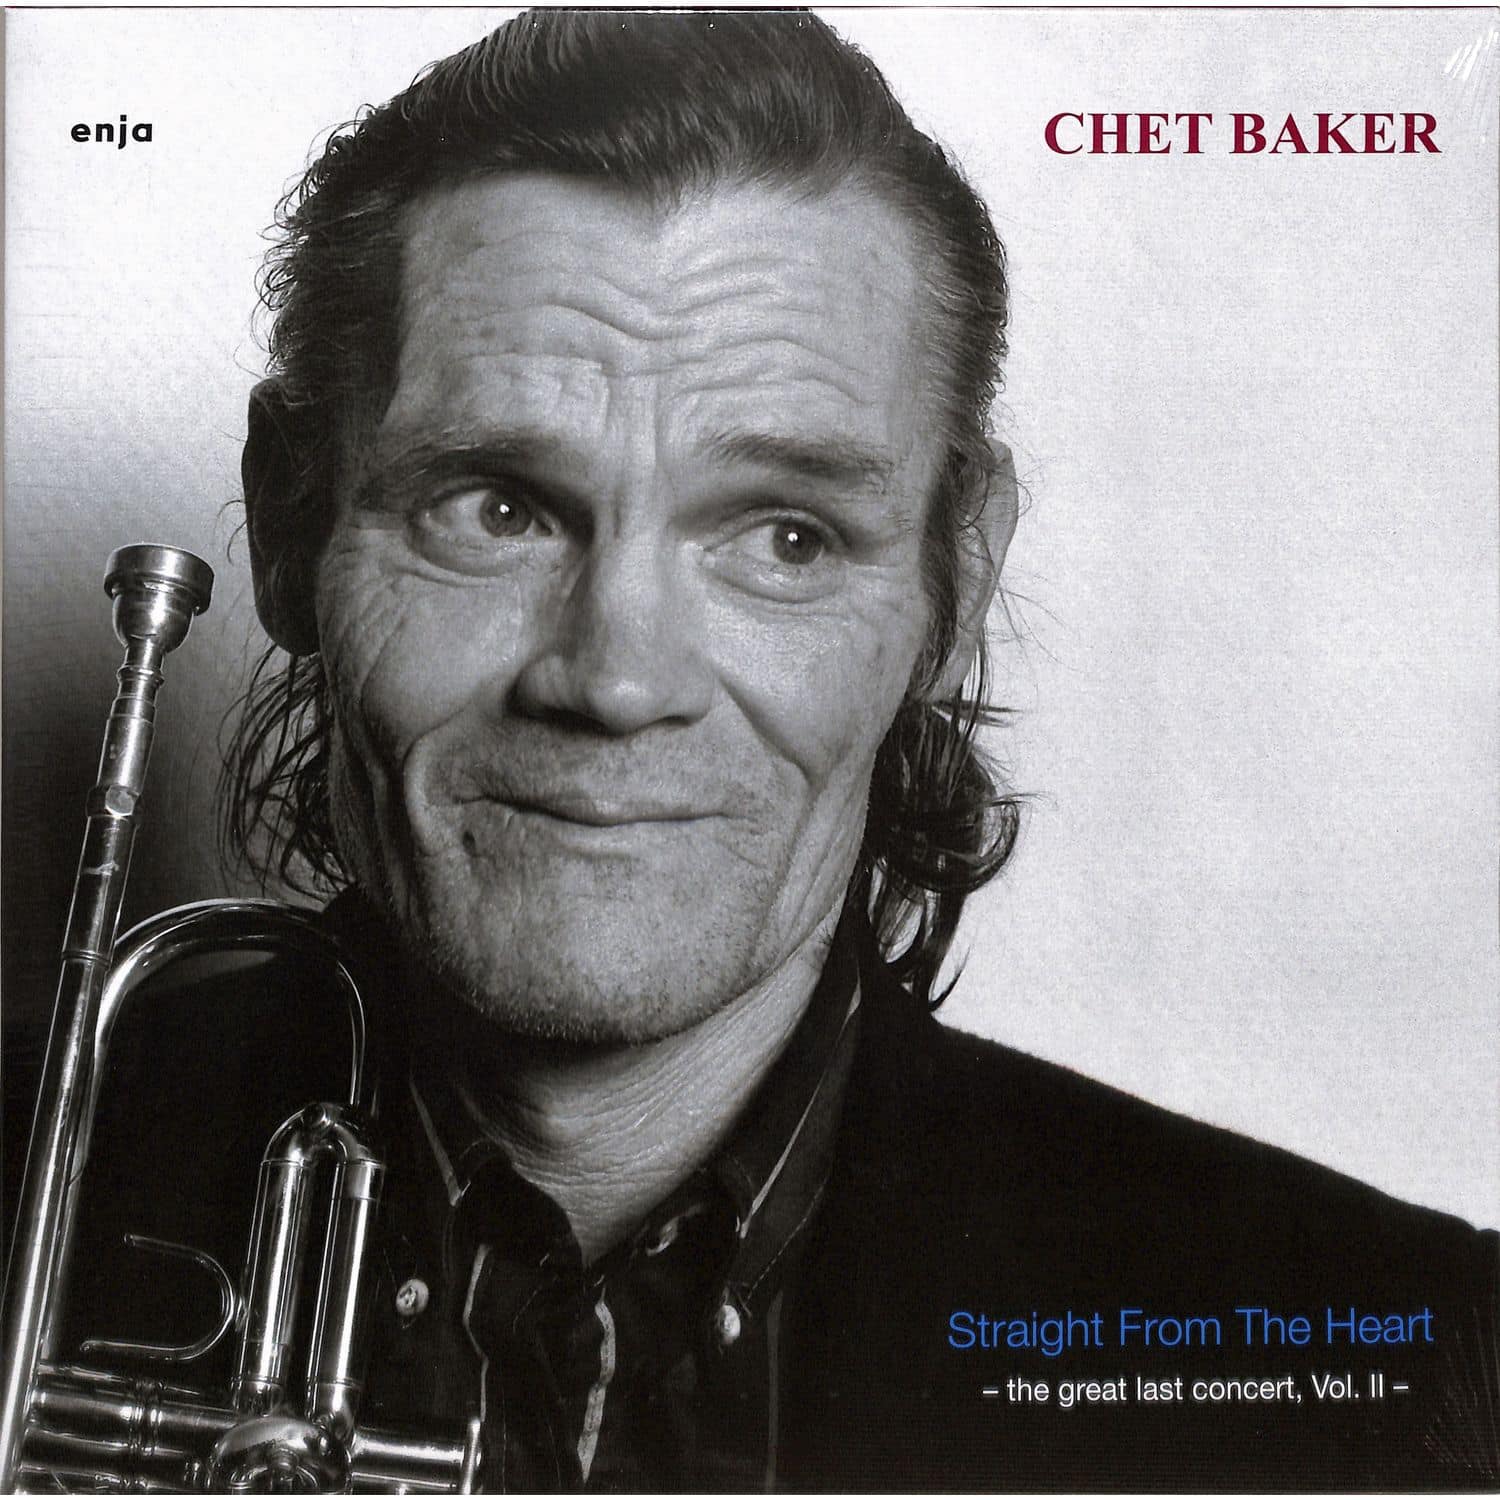 Chet Baker - STRAIGHT FROM THE HEART - THE GREAT LAST CONCERT, VOL. II 